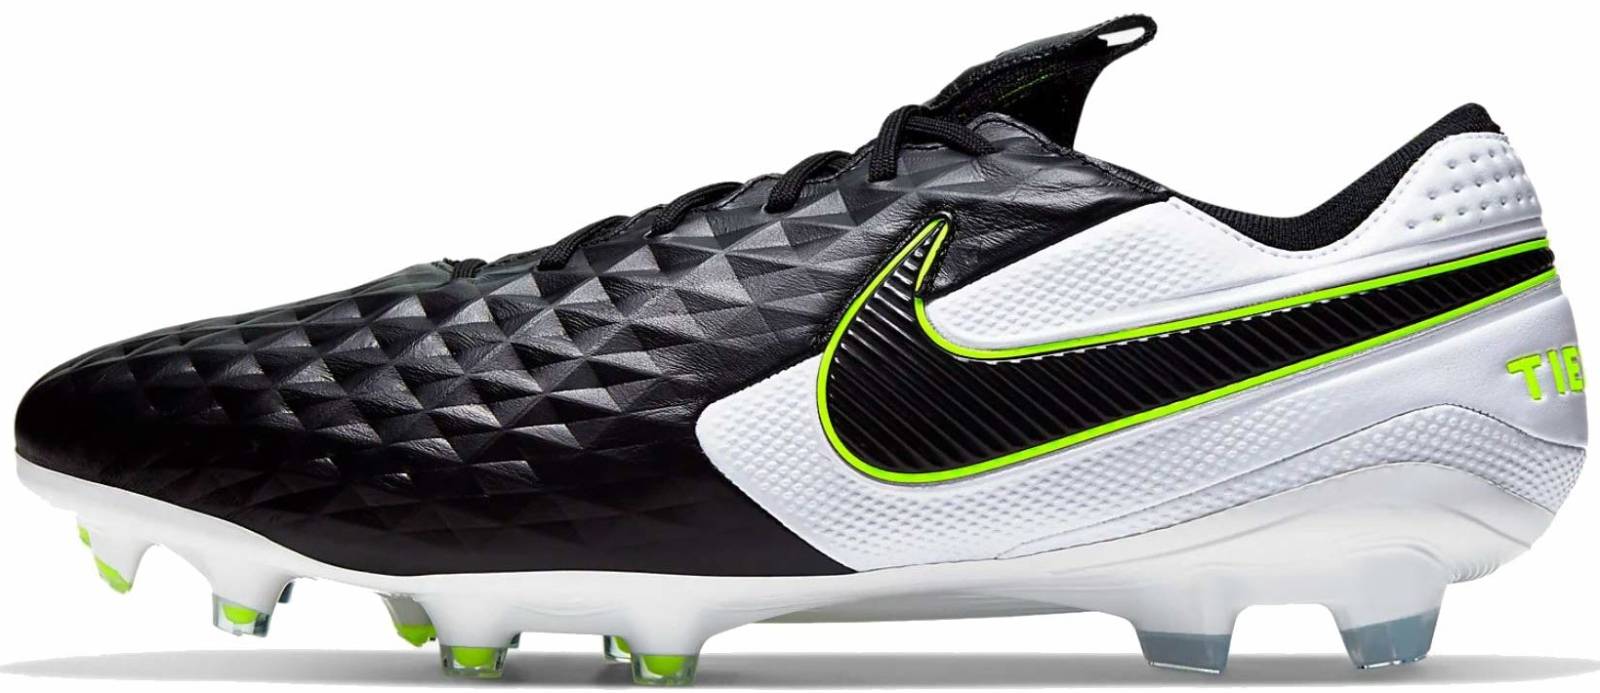 nike football shoes under 1000